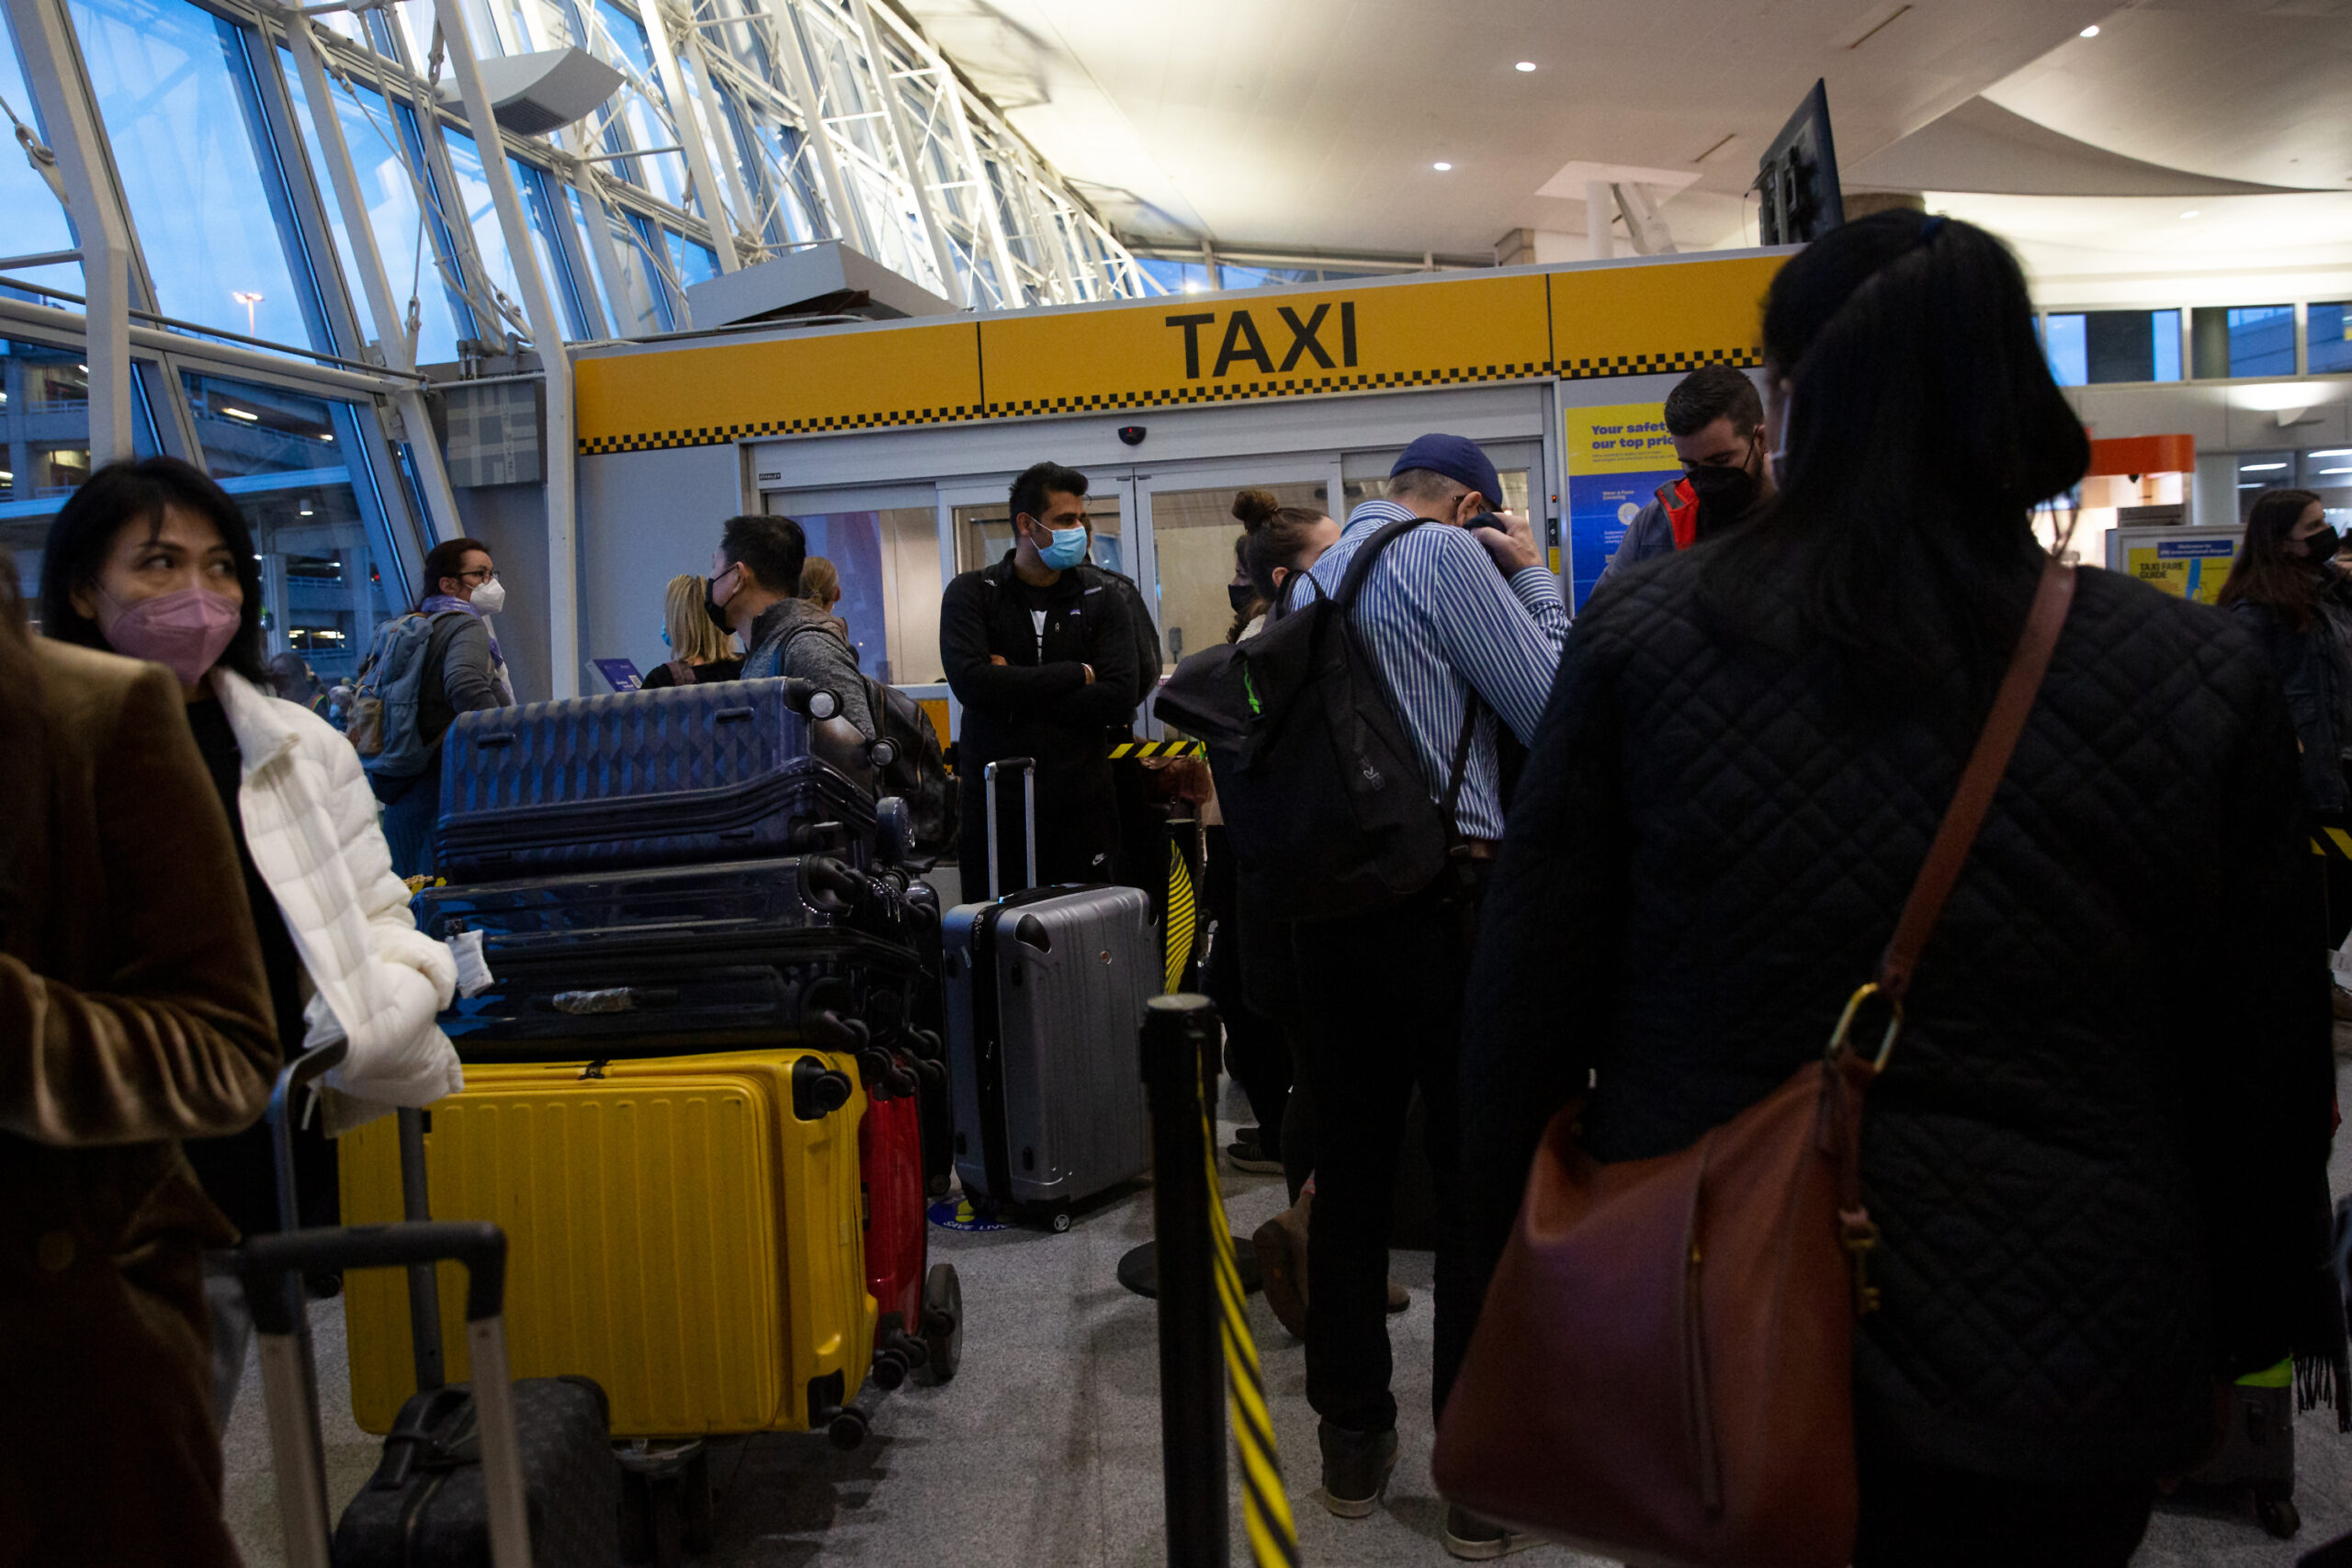 Runway to Taxi Gets Longer as Cab Shortage Hits Thanksgiving Airport Travelers